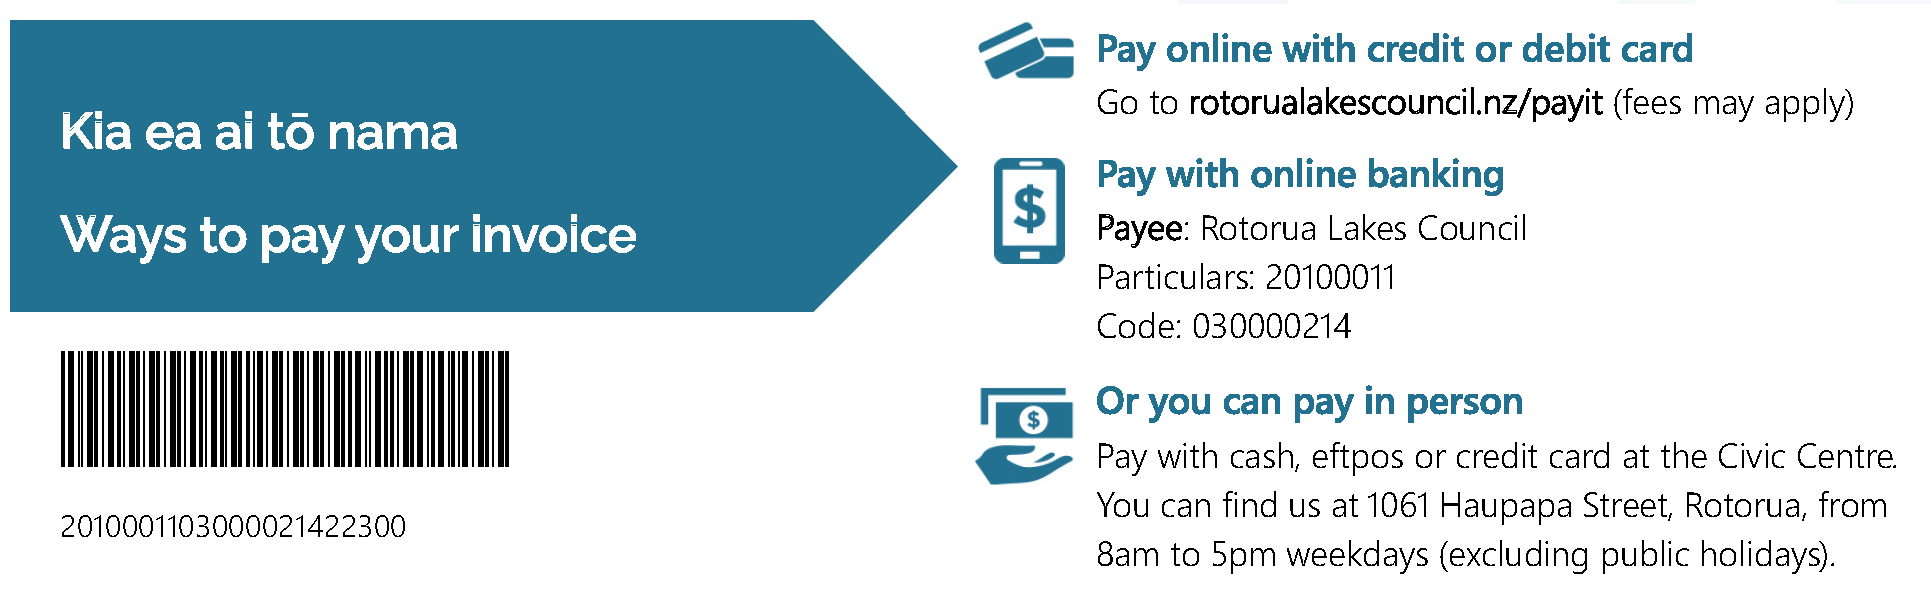 Information on ways to pay your invoice via credit card, online or in person